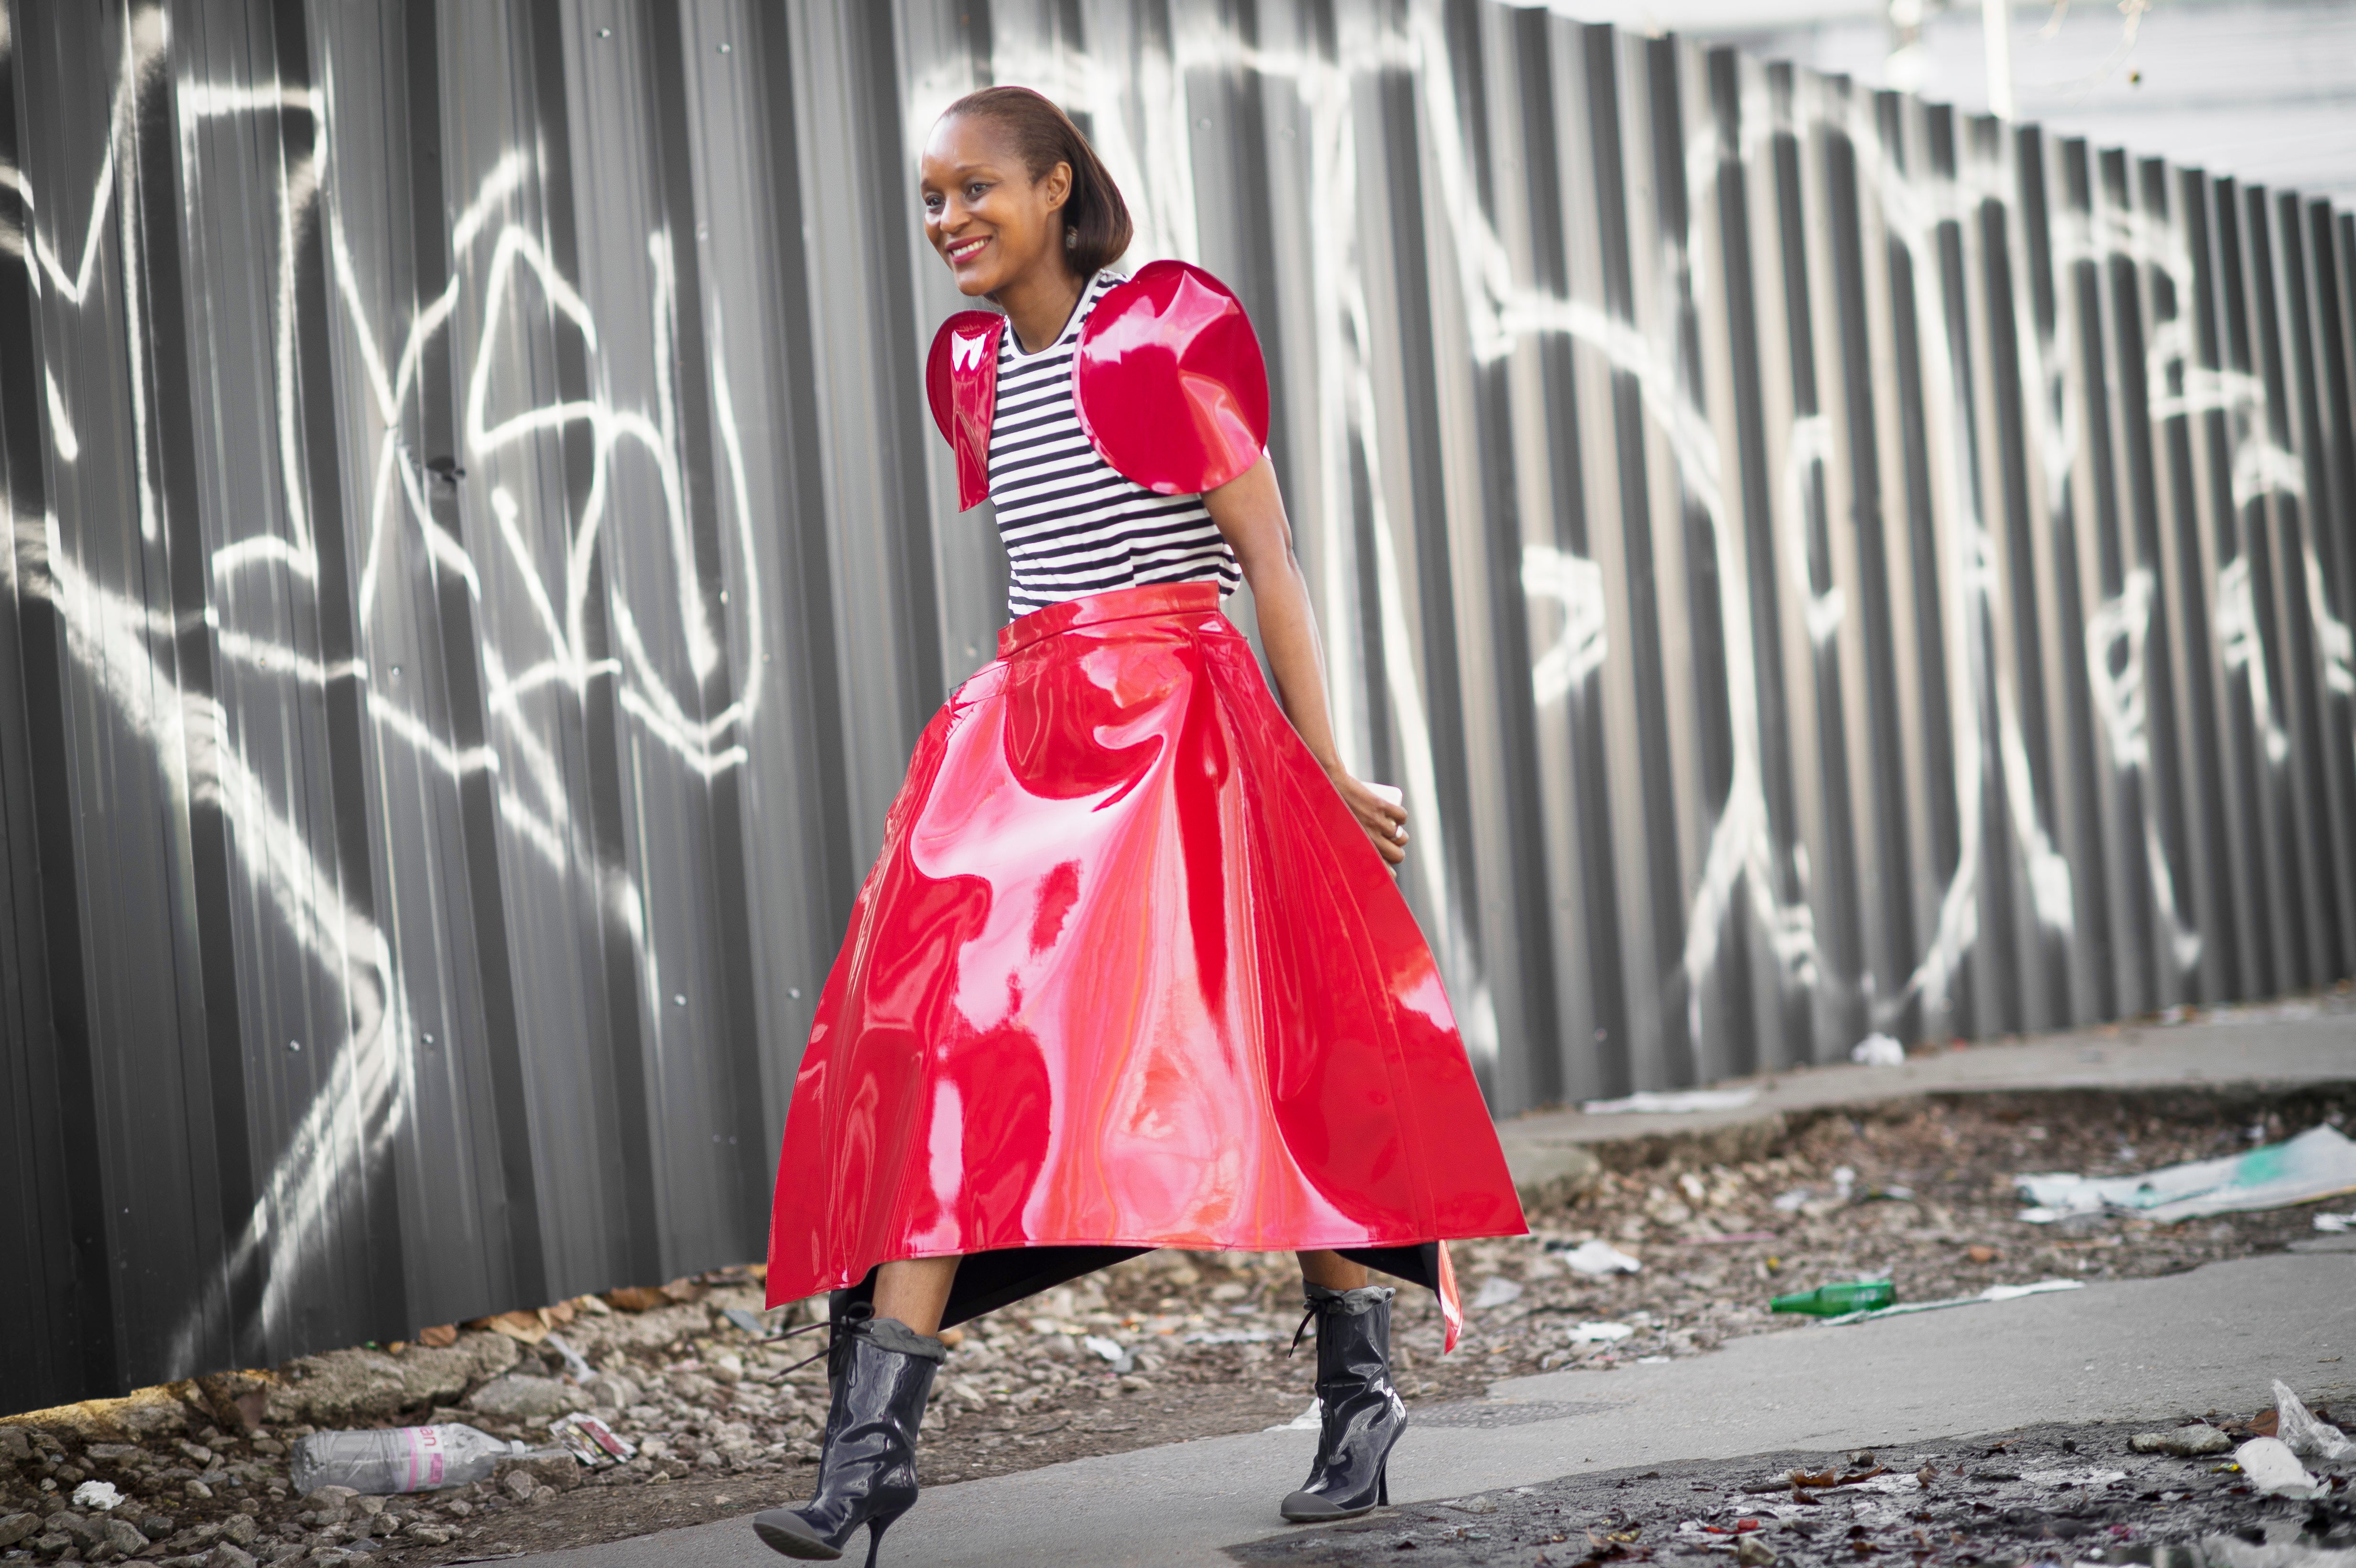 Meet Michelle Elie, The Style Star You Should Already Be Obsessed With